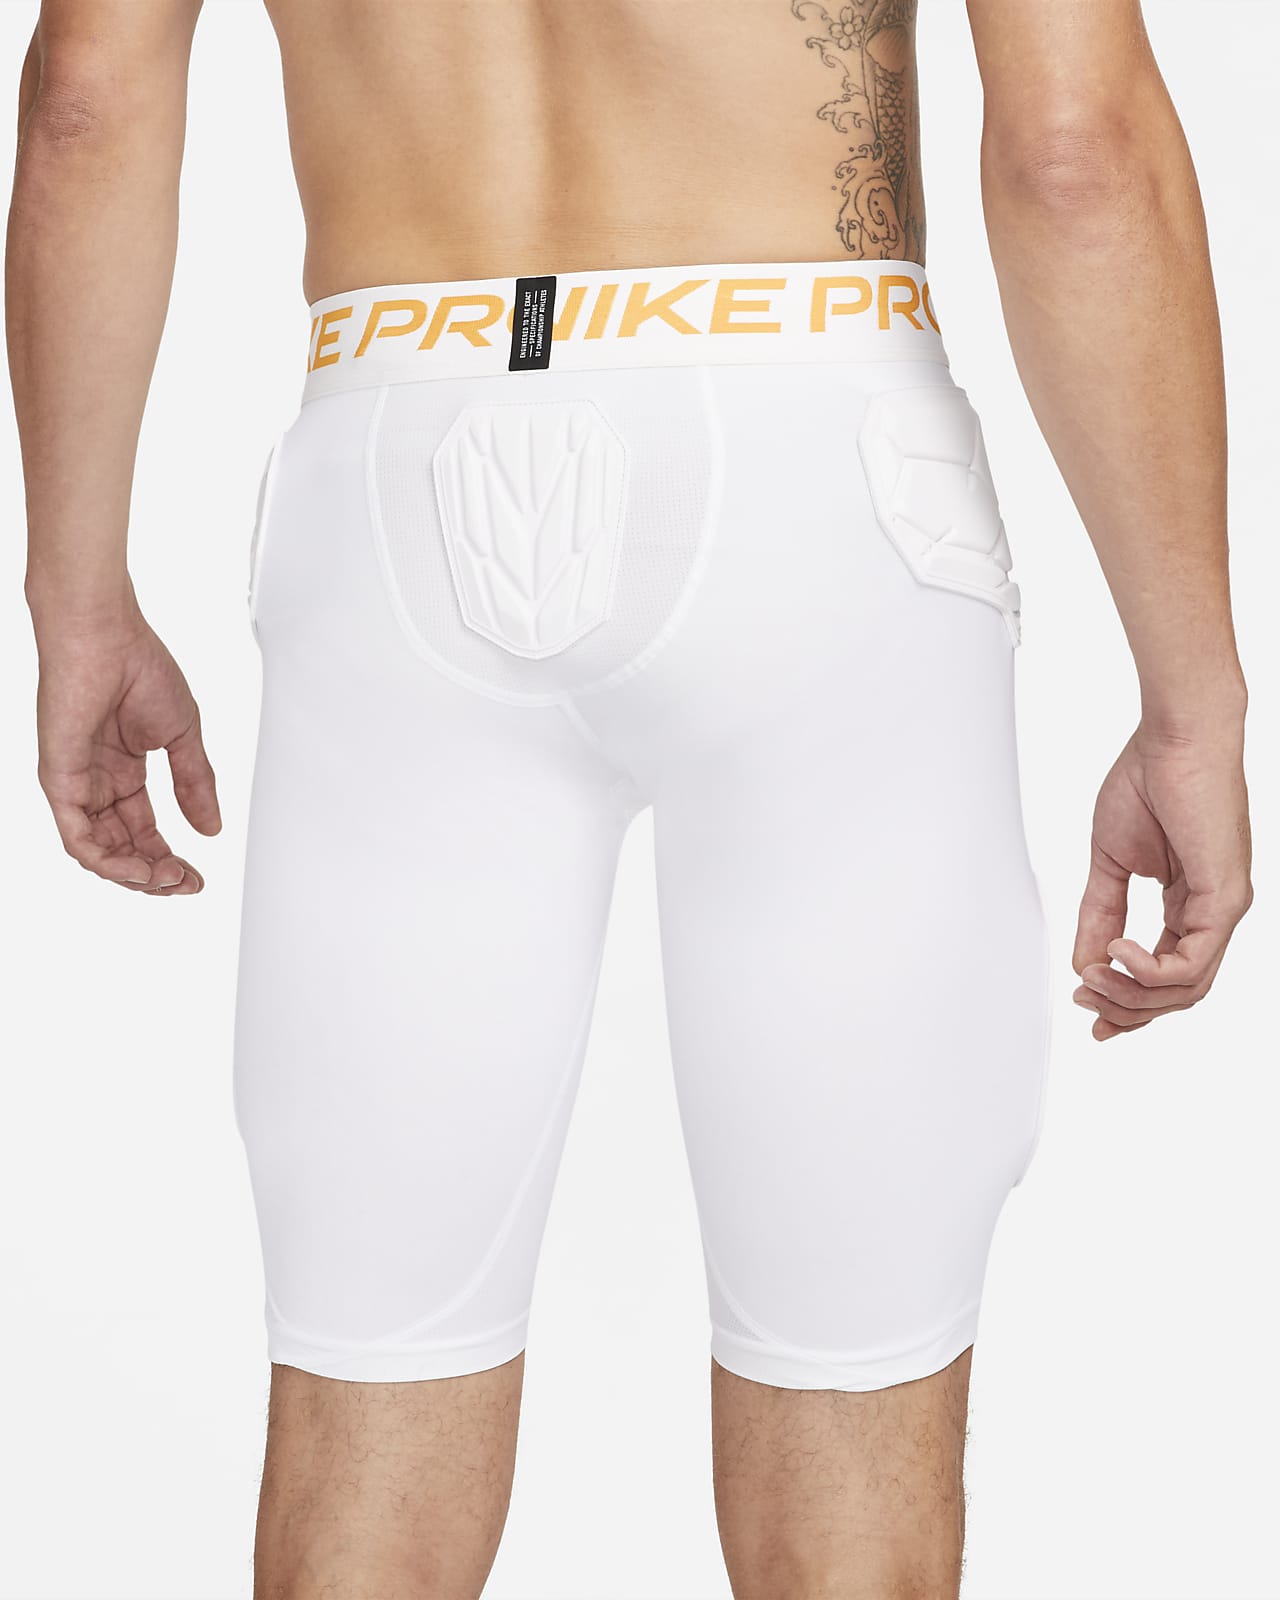 Nike, Other, Nike Pro Hyperstrong Padded Compression Pants Med